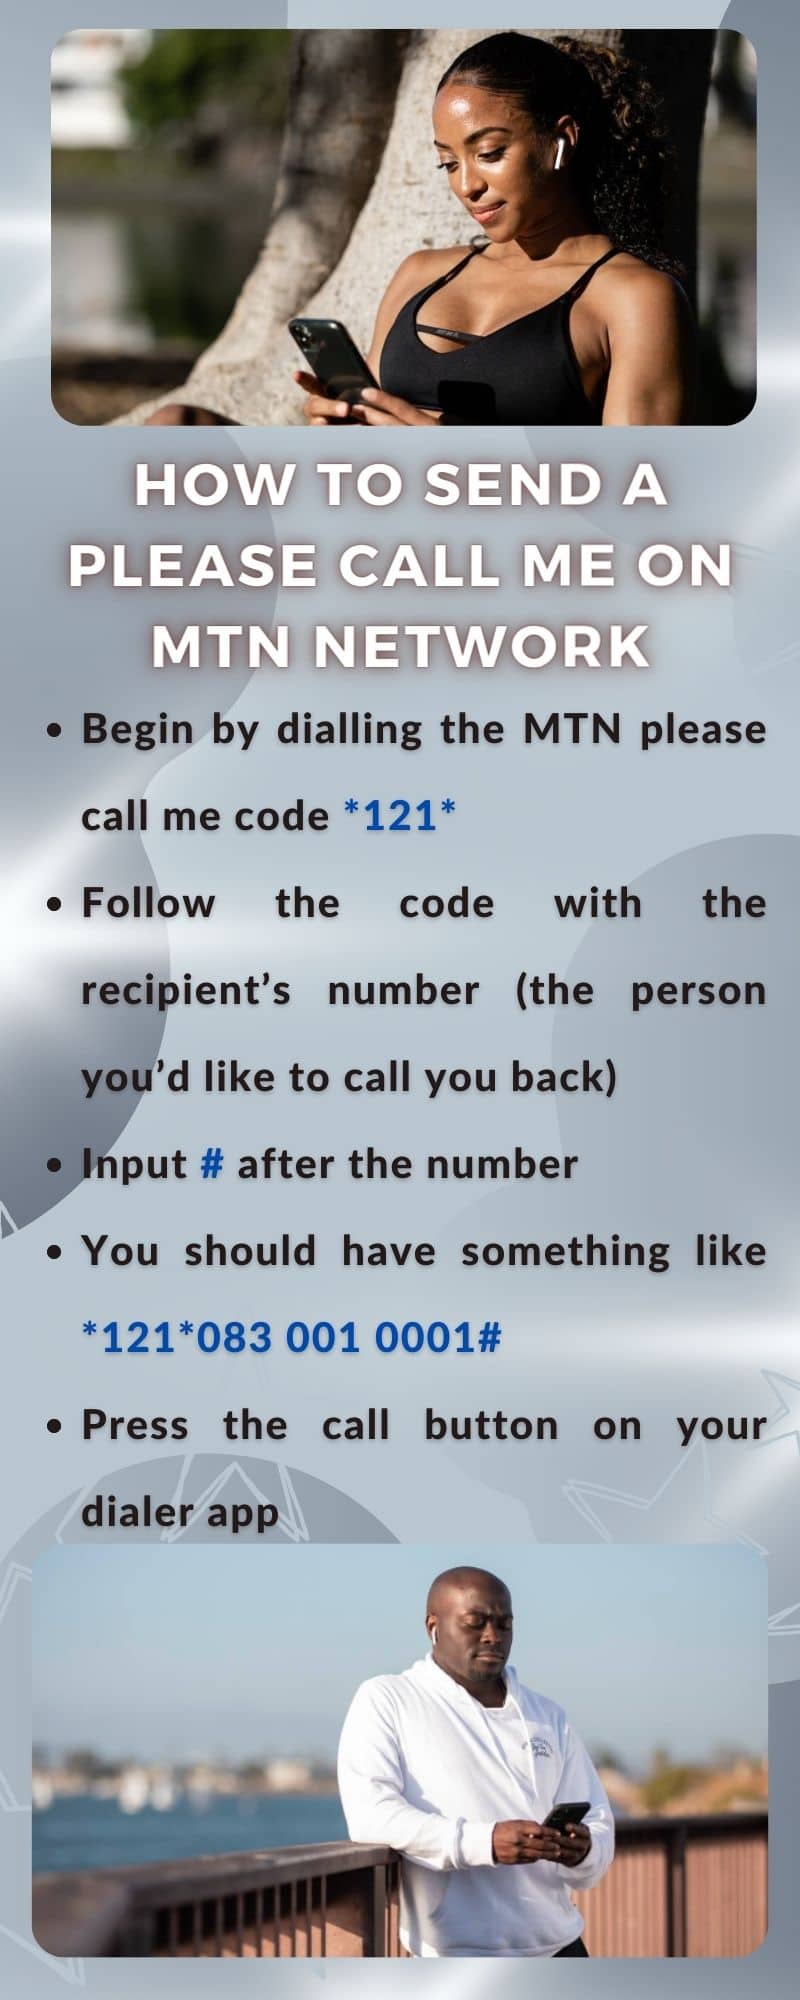 How to send a Please Call Me on MTN network